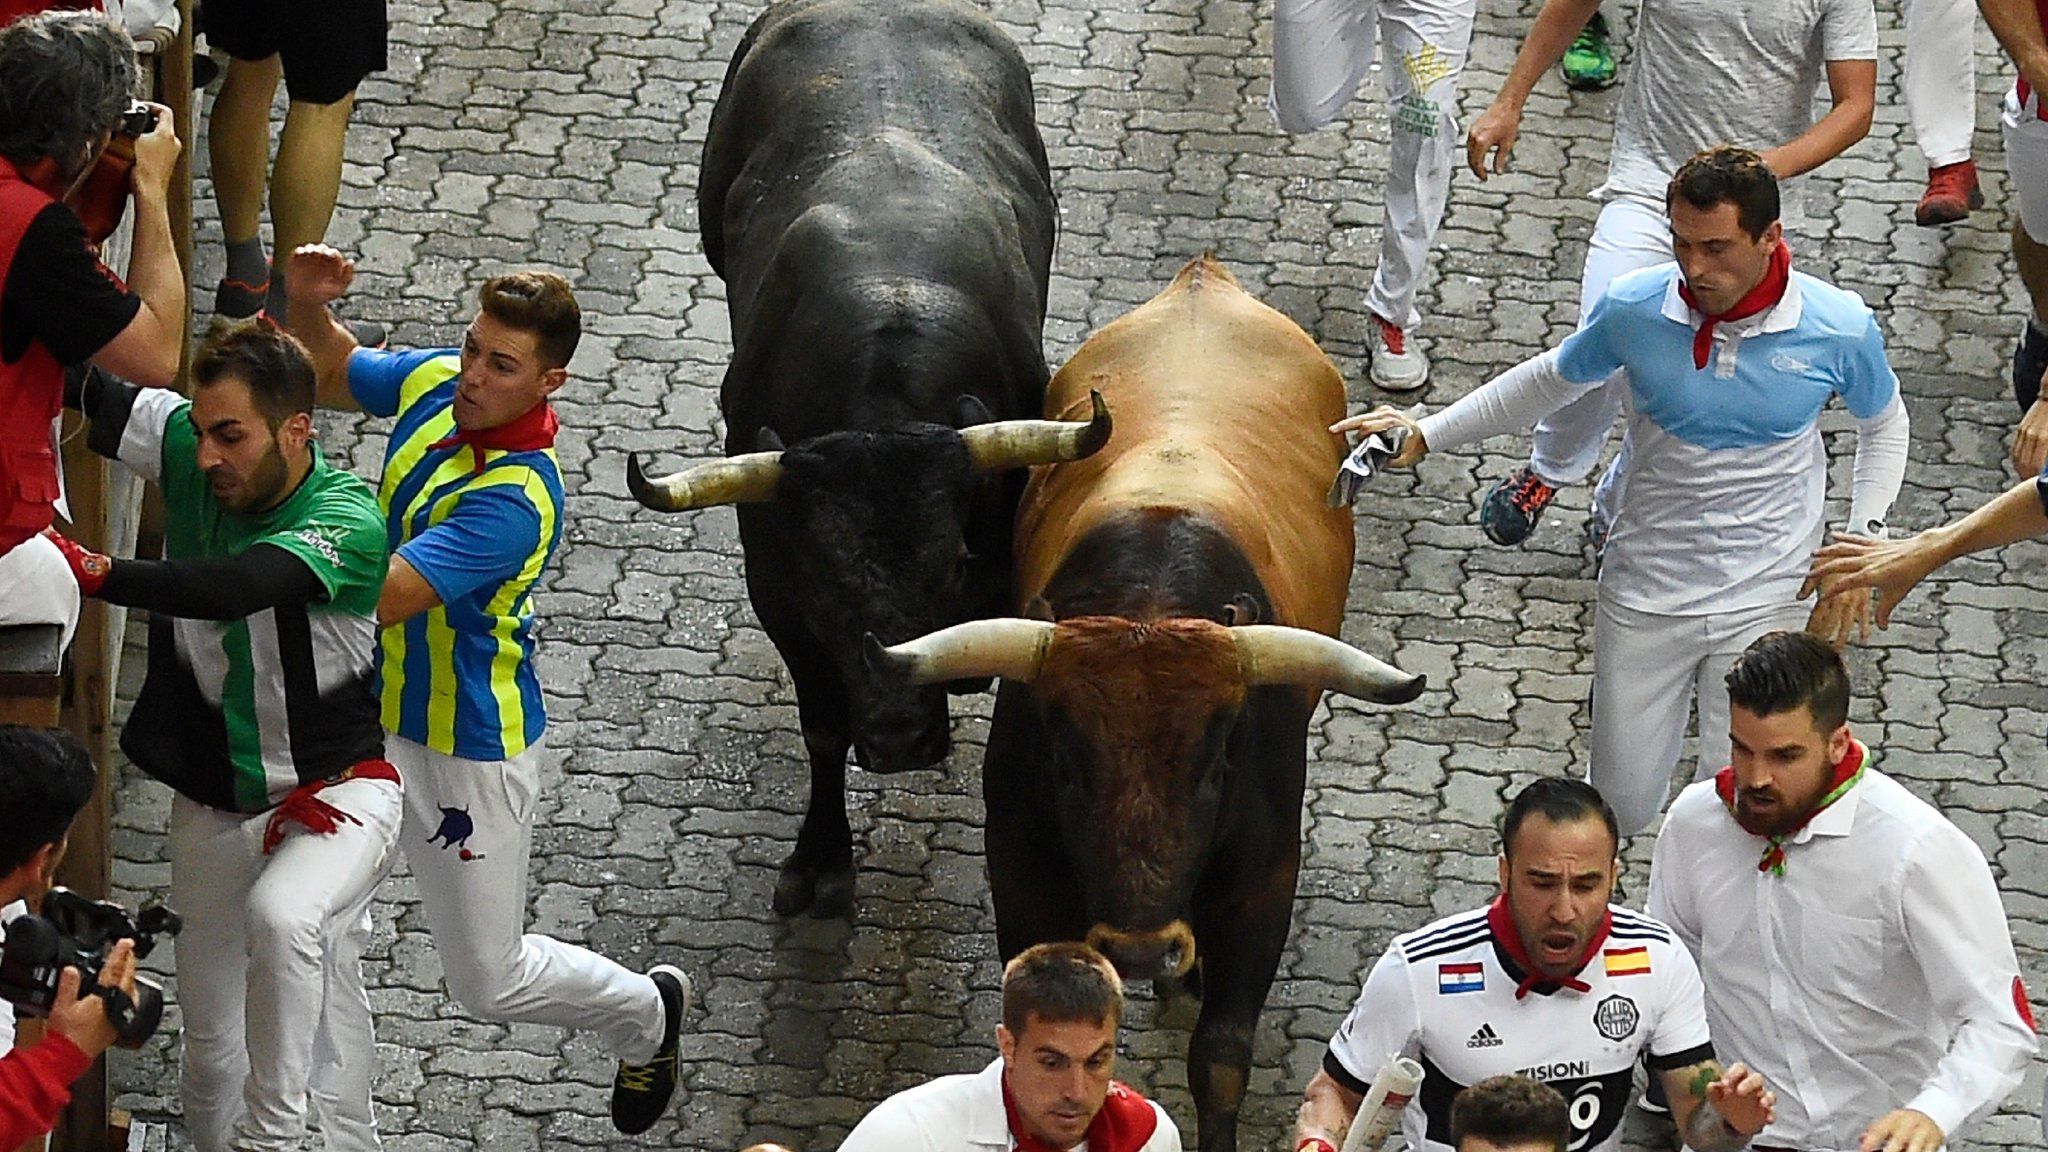 Participants run next to bulls on the last bull run of the San Fermin festival in Pamplona, northern Spain, on 14 July 2018